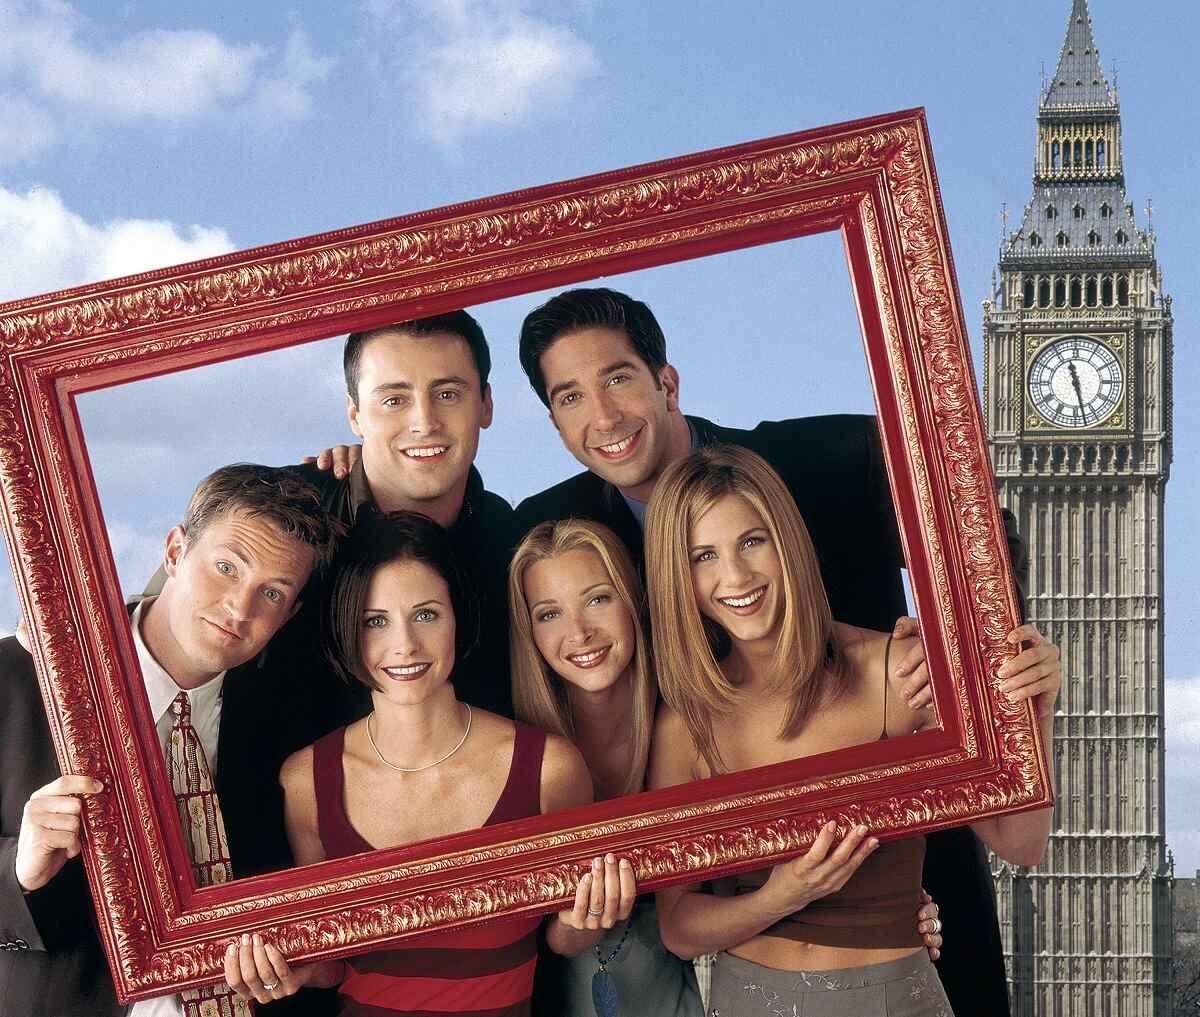 Matthew Perry as Chandler Bing, Matt Le Blank as Joey Tribbiani, David Schwimmer as Ross Geller, Jennifer Aniston as Rachel Green, Lisa Kudrow as Phoebe Buffay, and Courteney Cox as Monica Geller pose with a picture frame for a promotional photo for 'Friends'